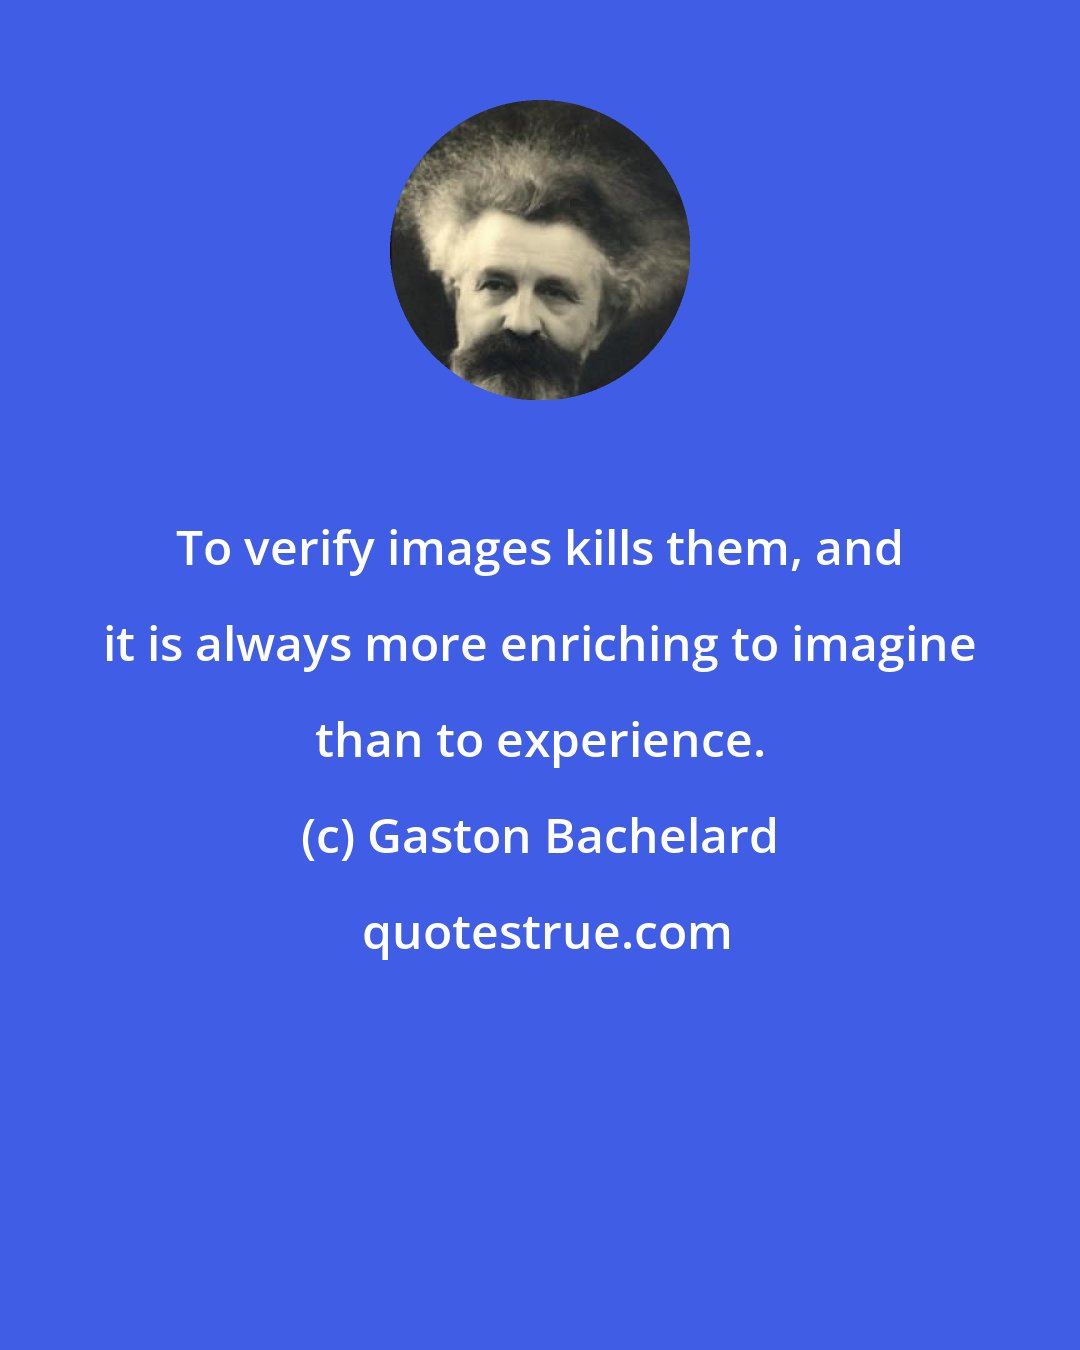 Gaston Bachelard: To verify images kills them, and it is always more enriching to imagine than to experience.